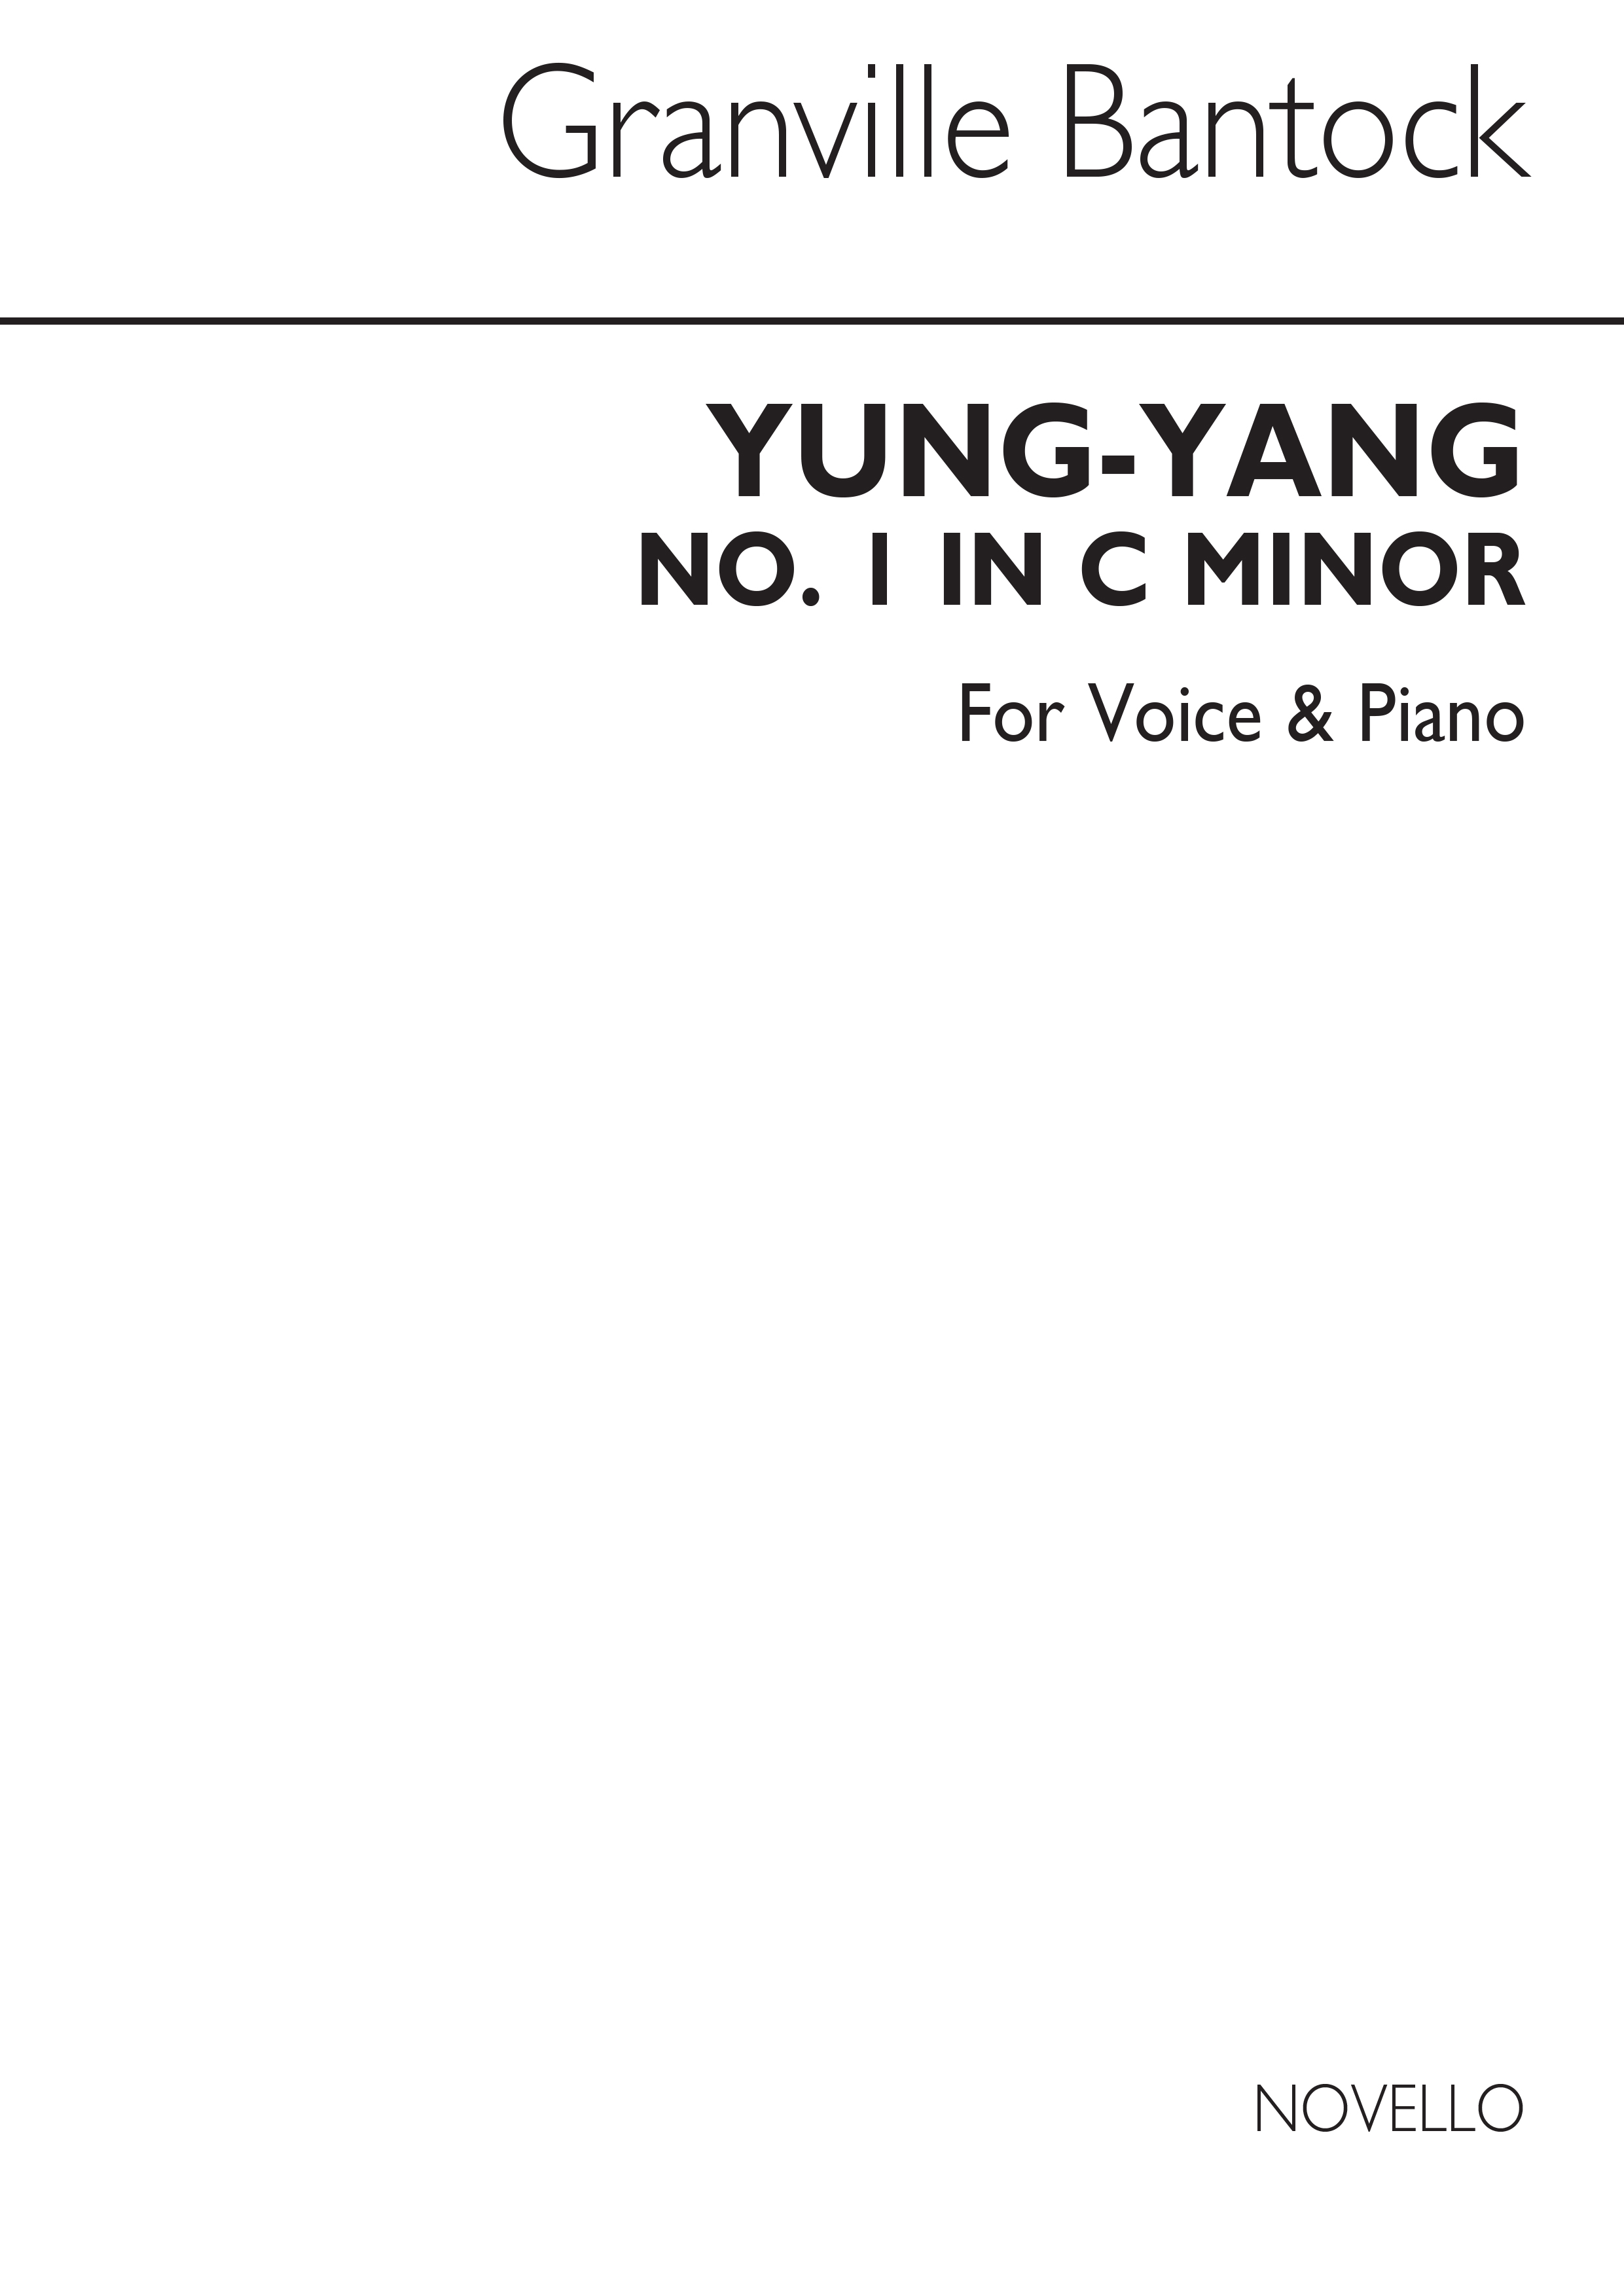 Granville Bantock: Yung-yang for Medium Voice and Piano accompaniment: Voice: